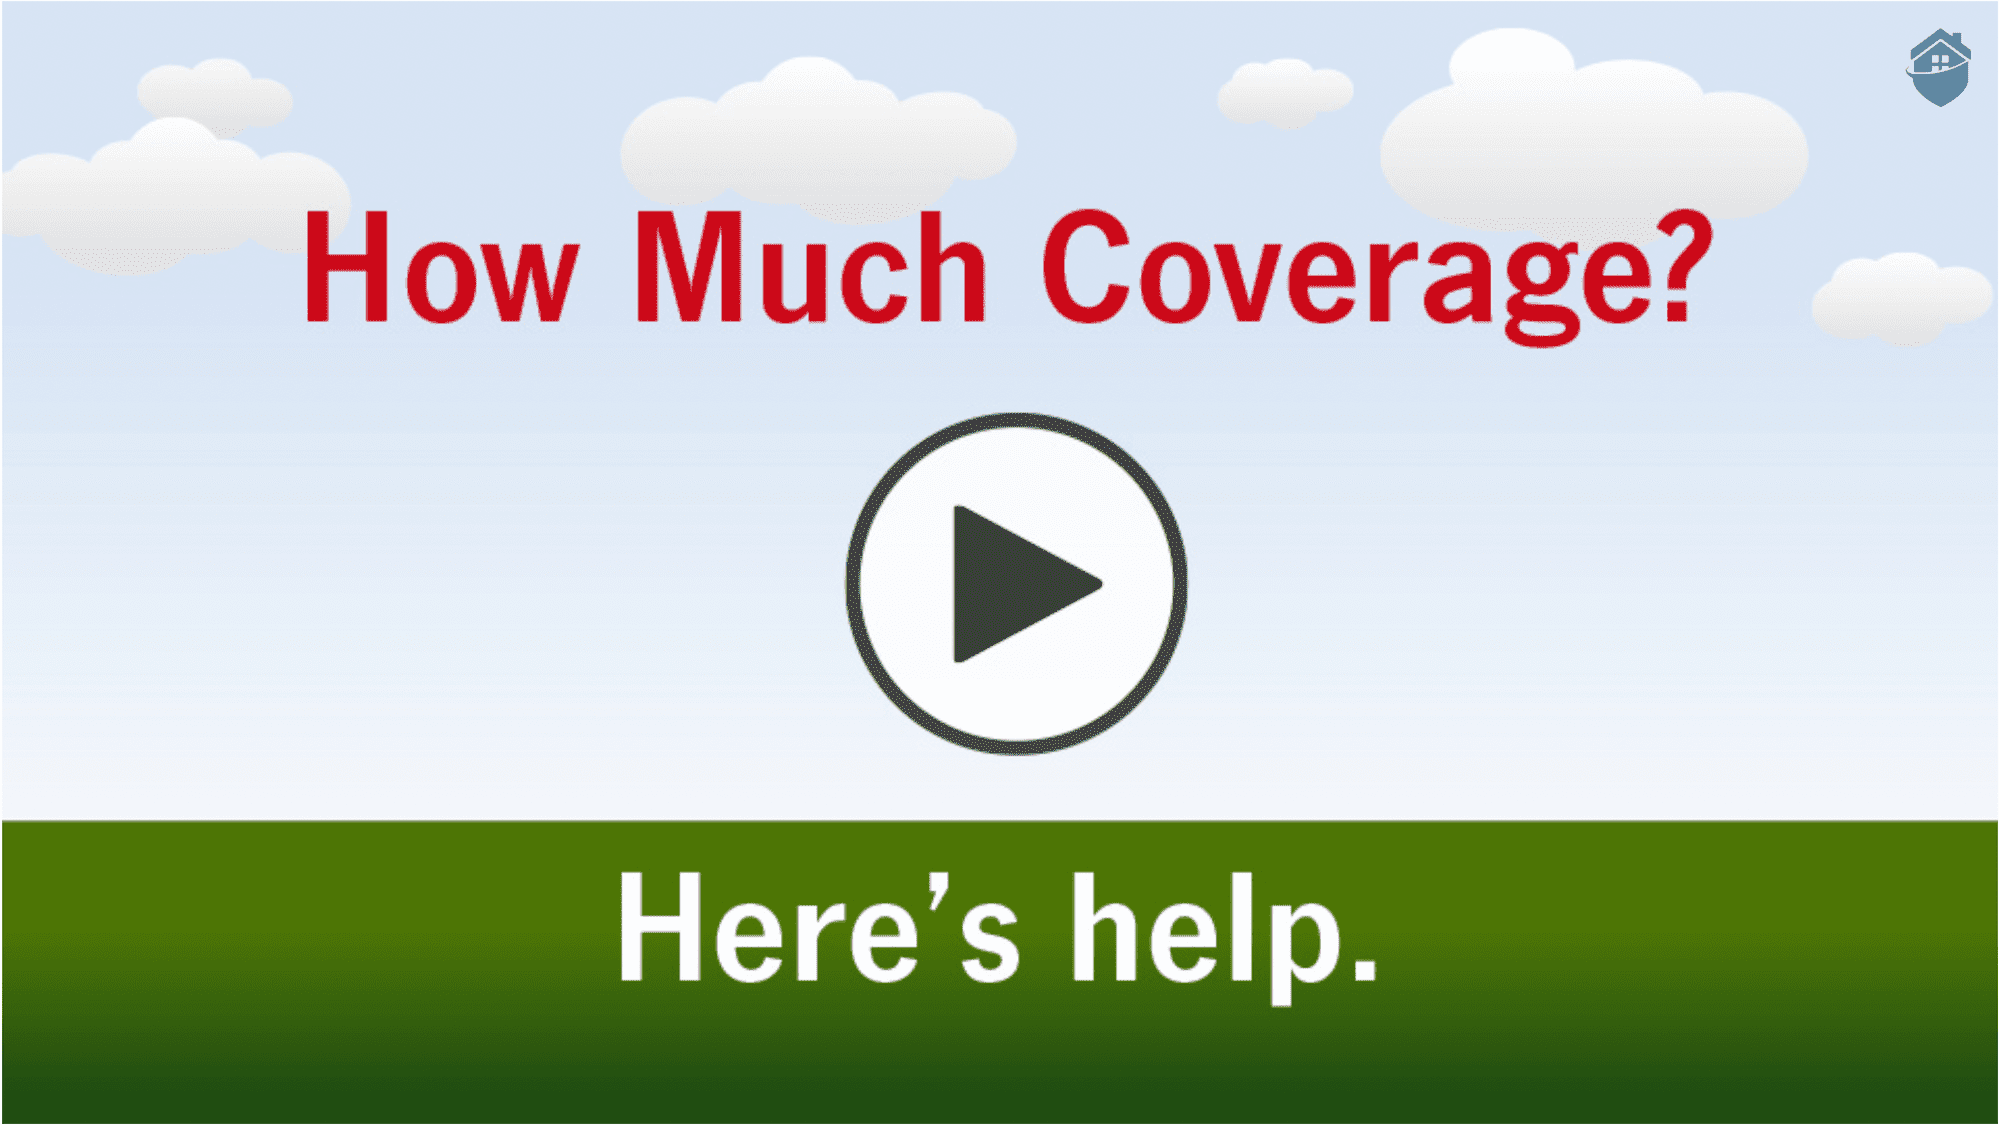 State Farm’s 360Value Tool helped me figure out the right amount of dwelling coverage.